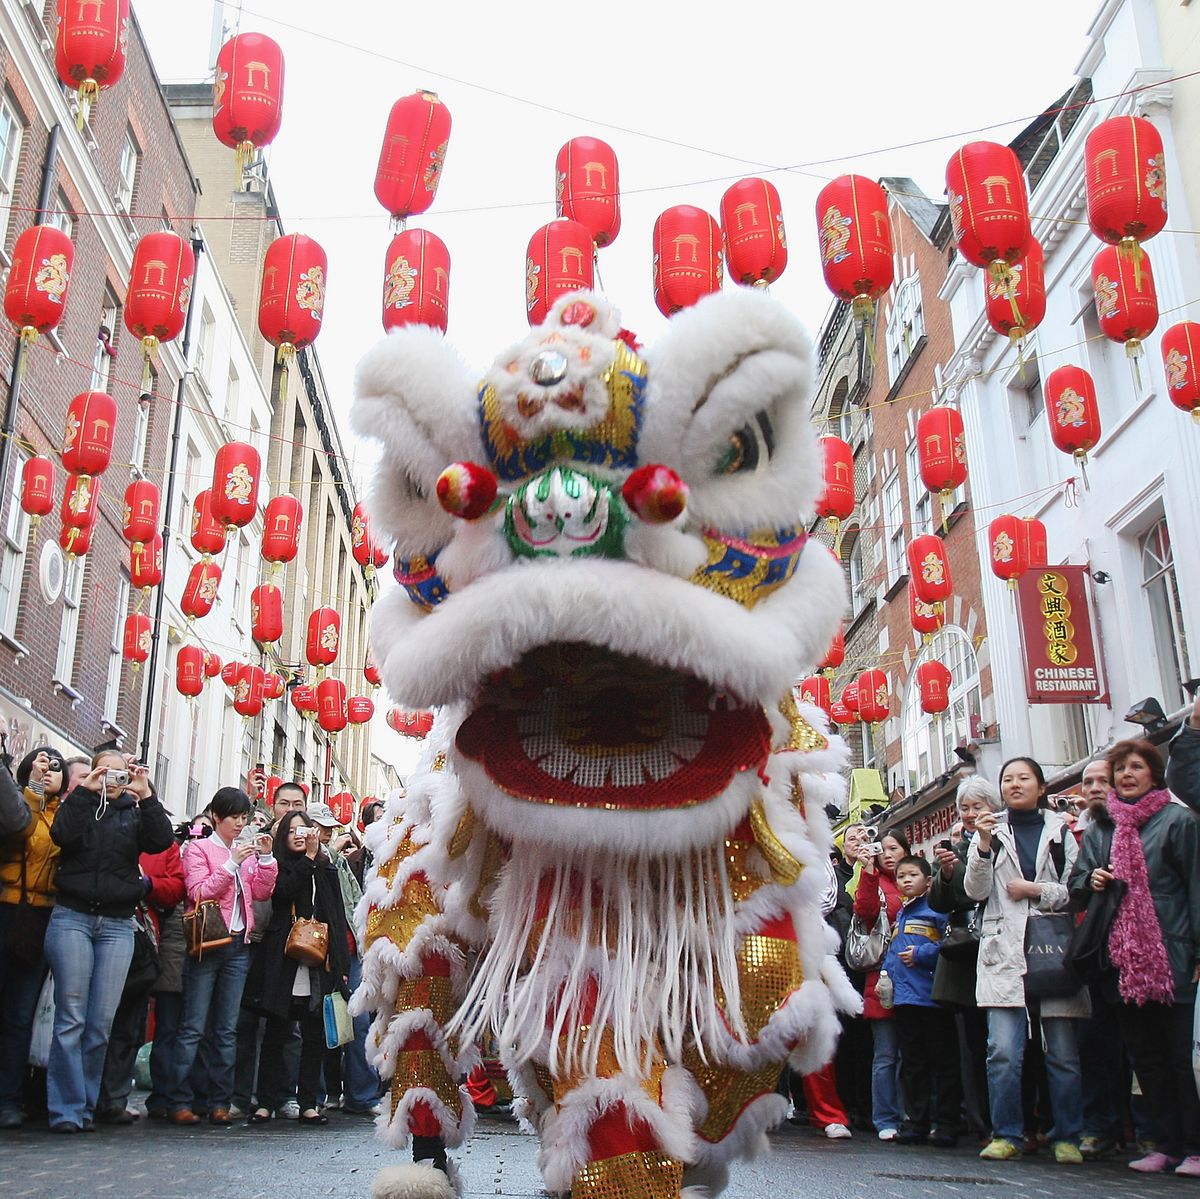 Celebrate This Chinese New Year With These Decoration Ideas